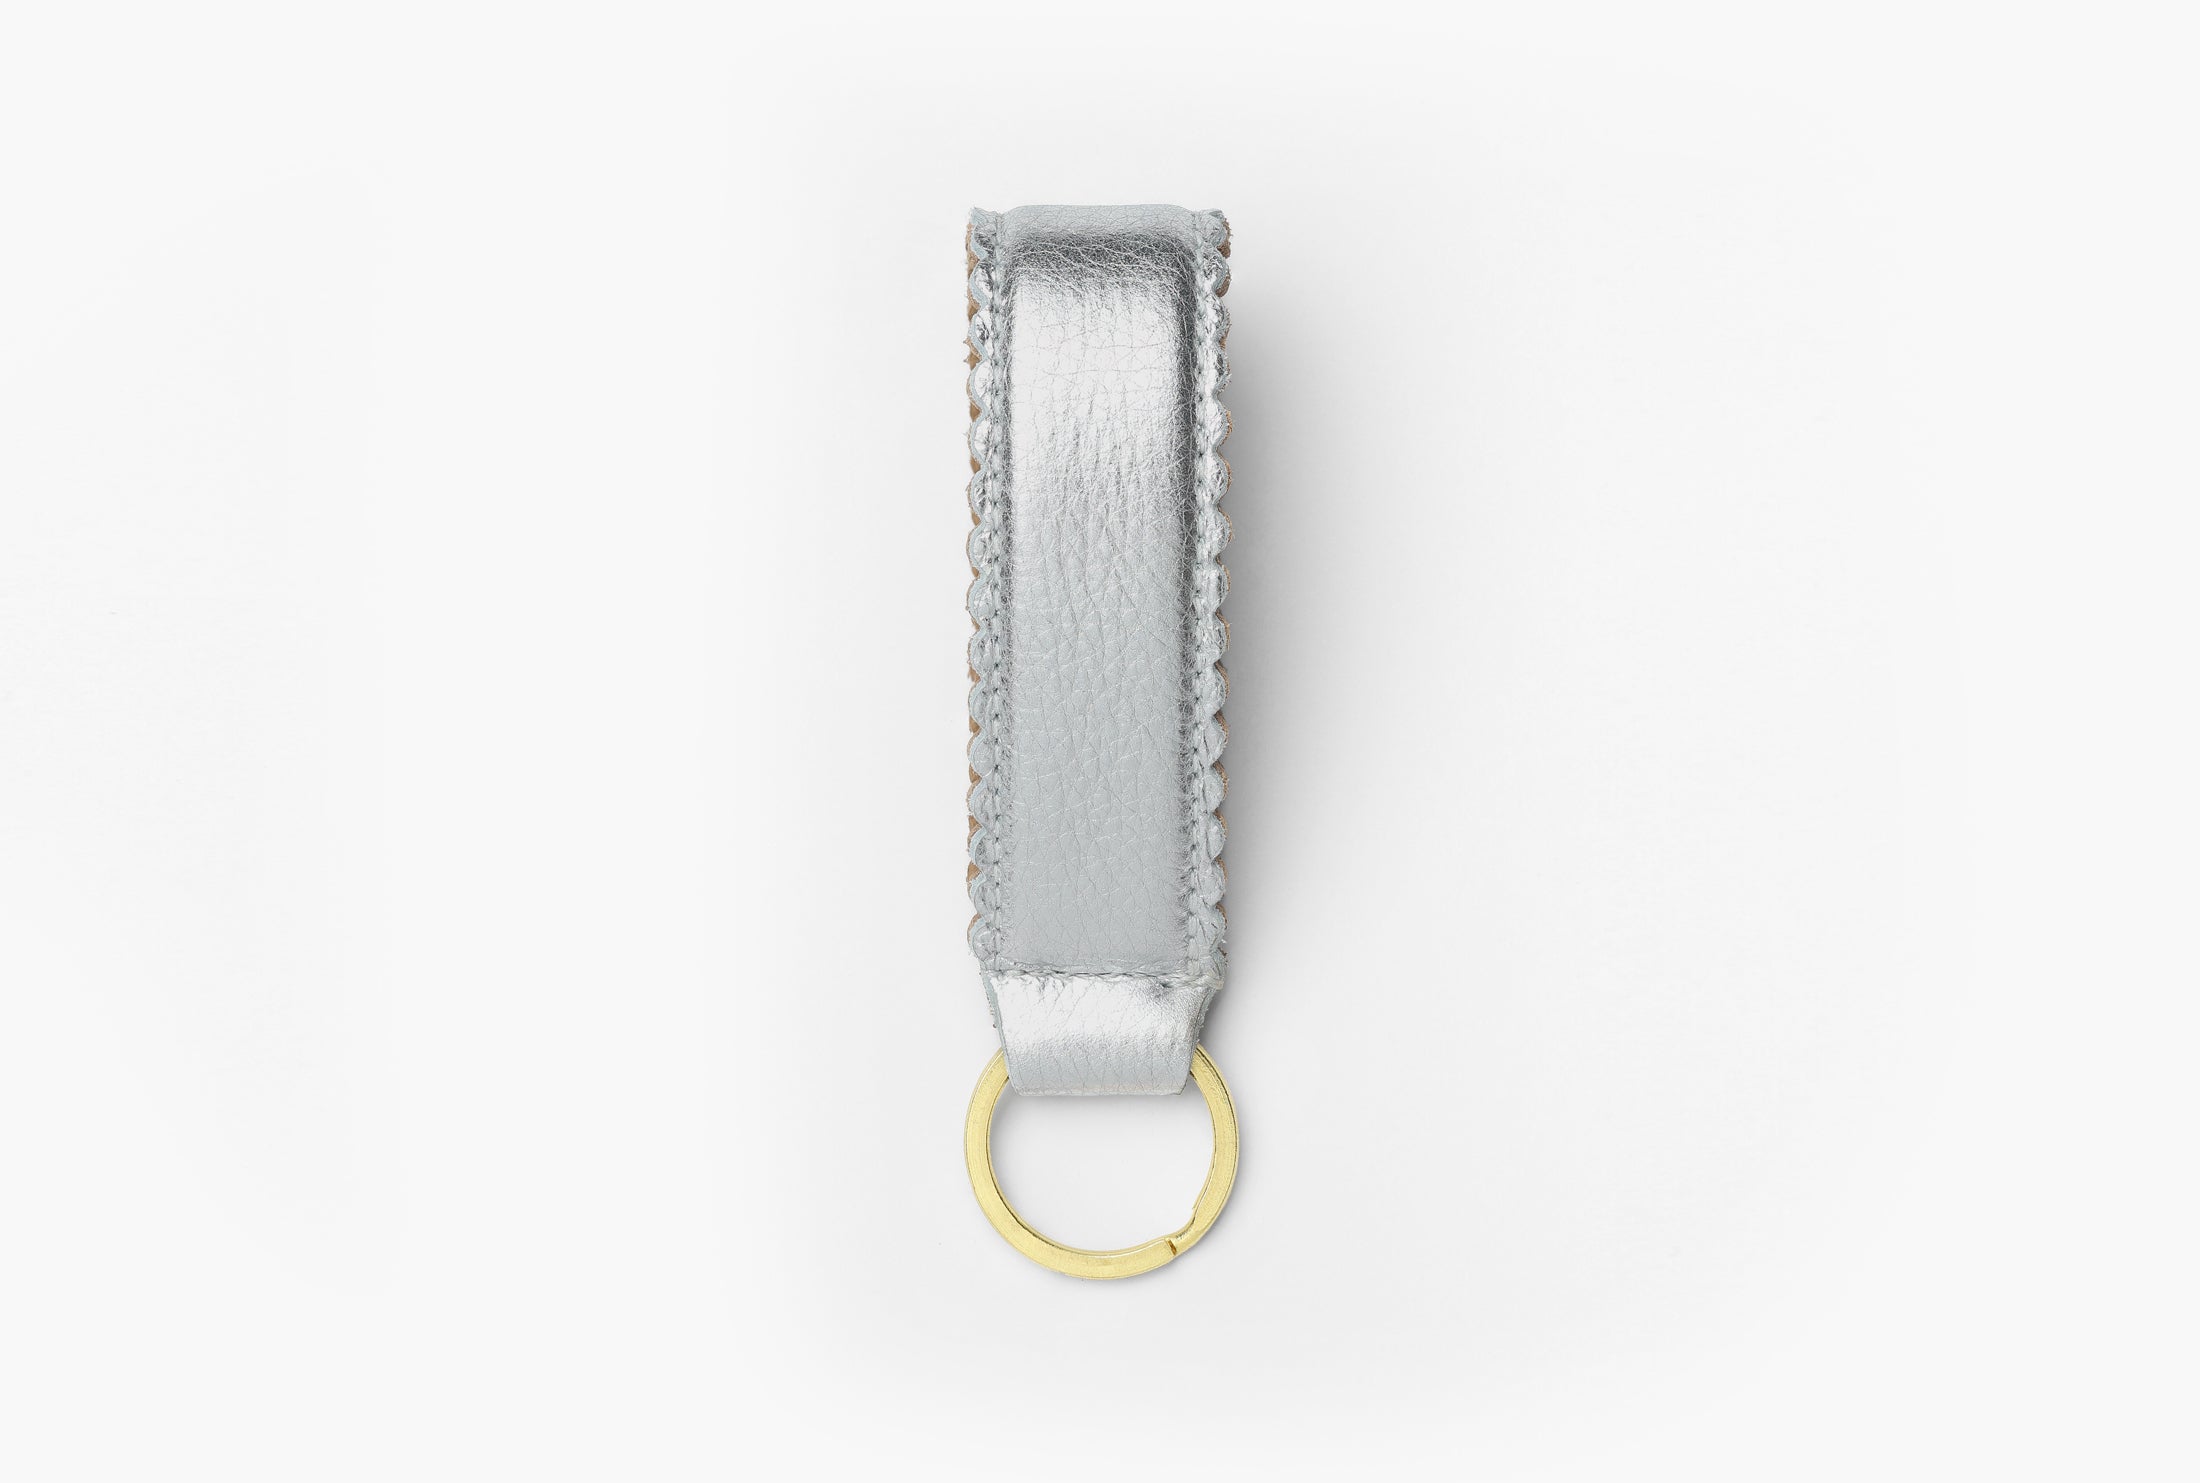 Silver and tan leather keychain with brass ring